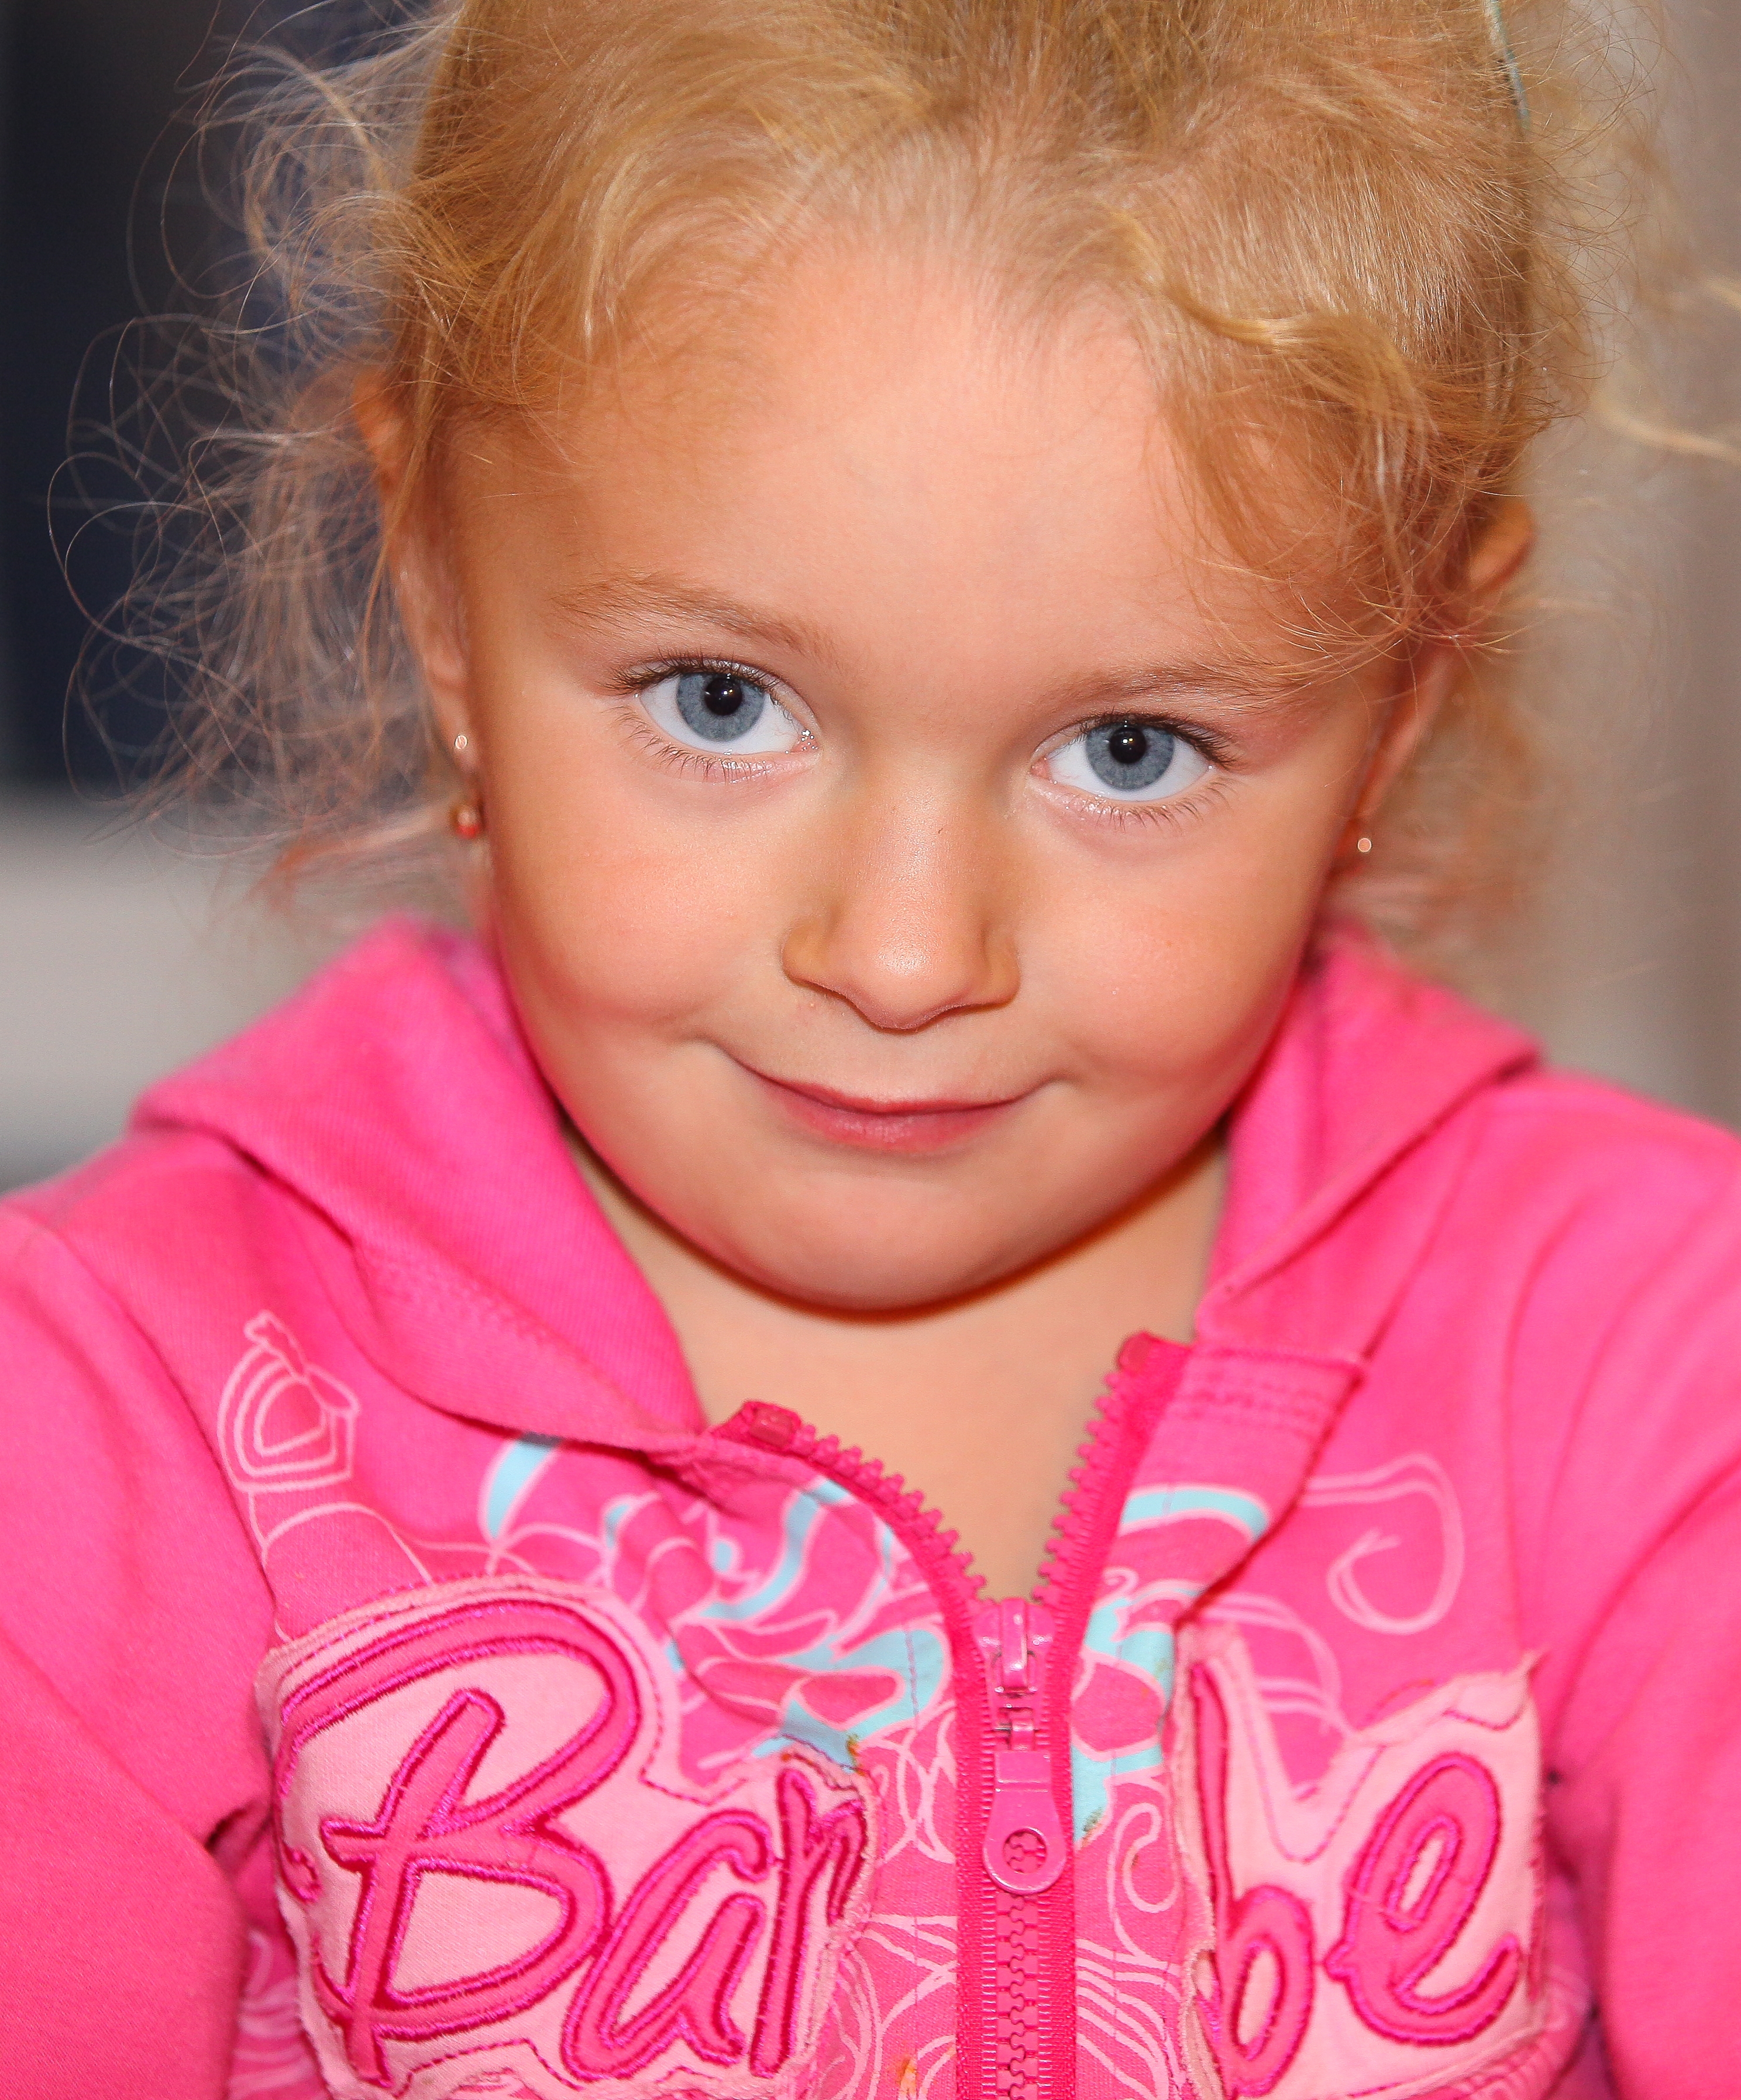 a sweet blond young girl photographed in September 2013, picture 3/4